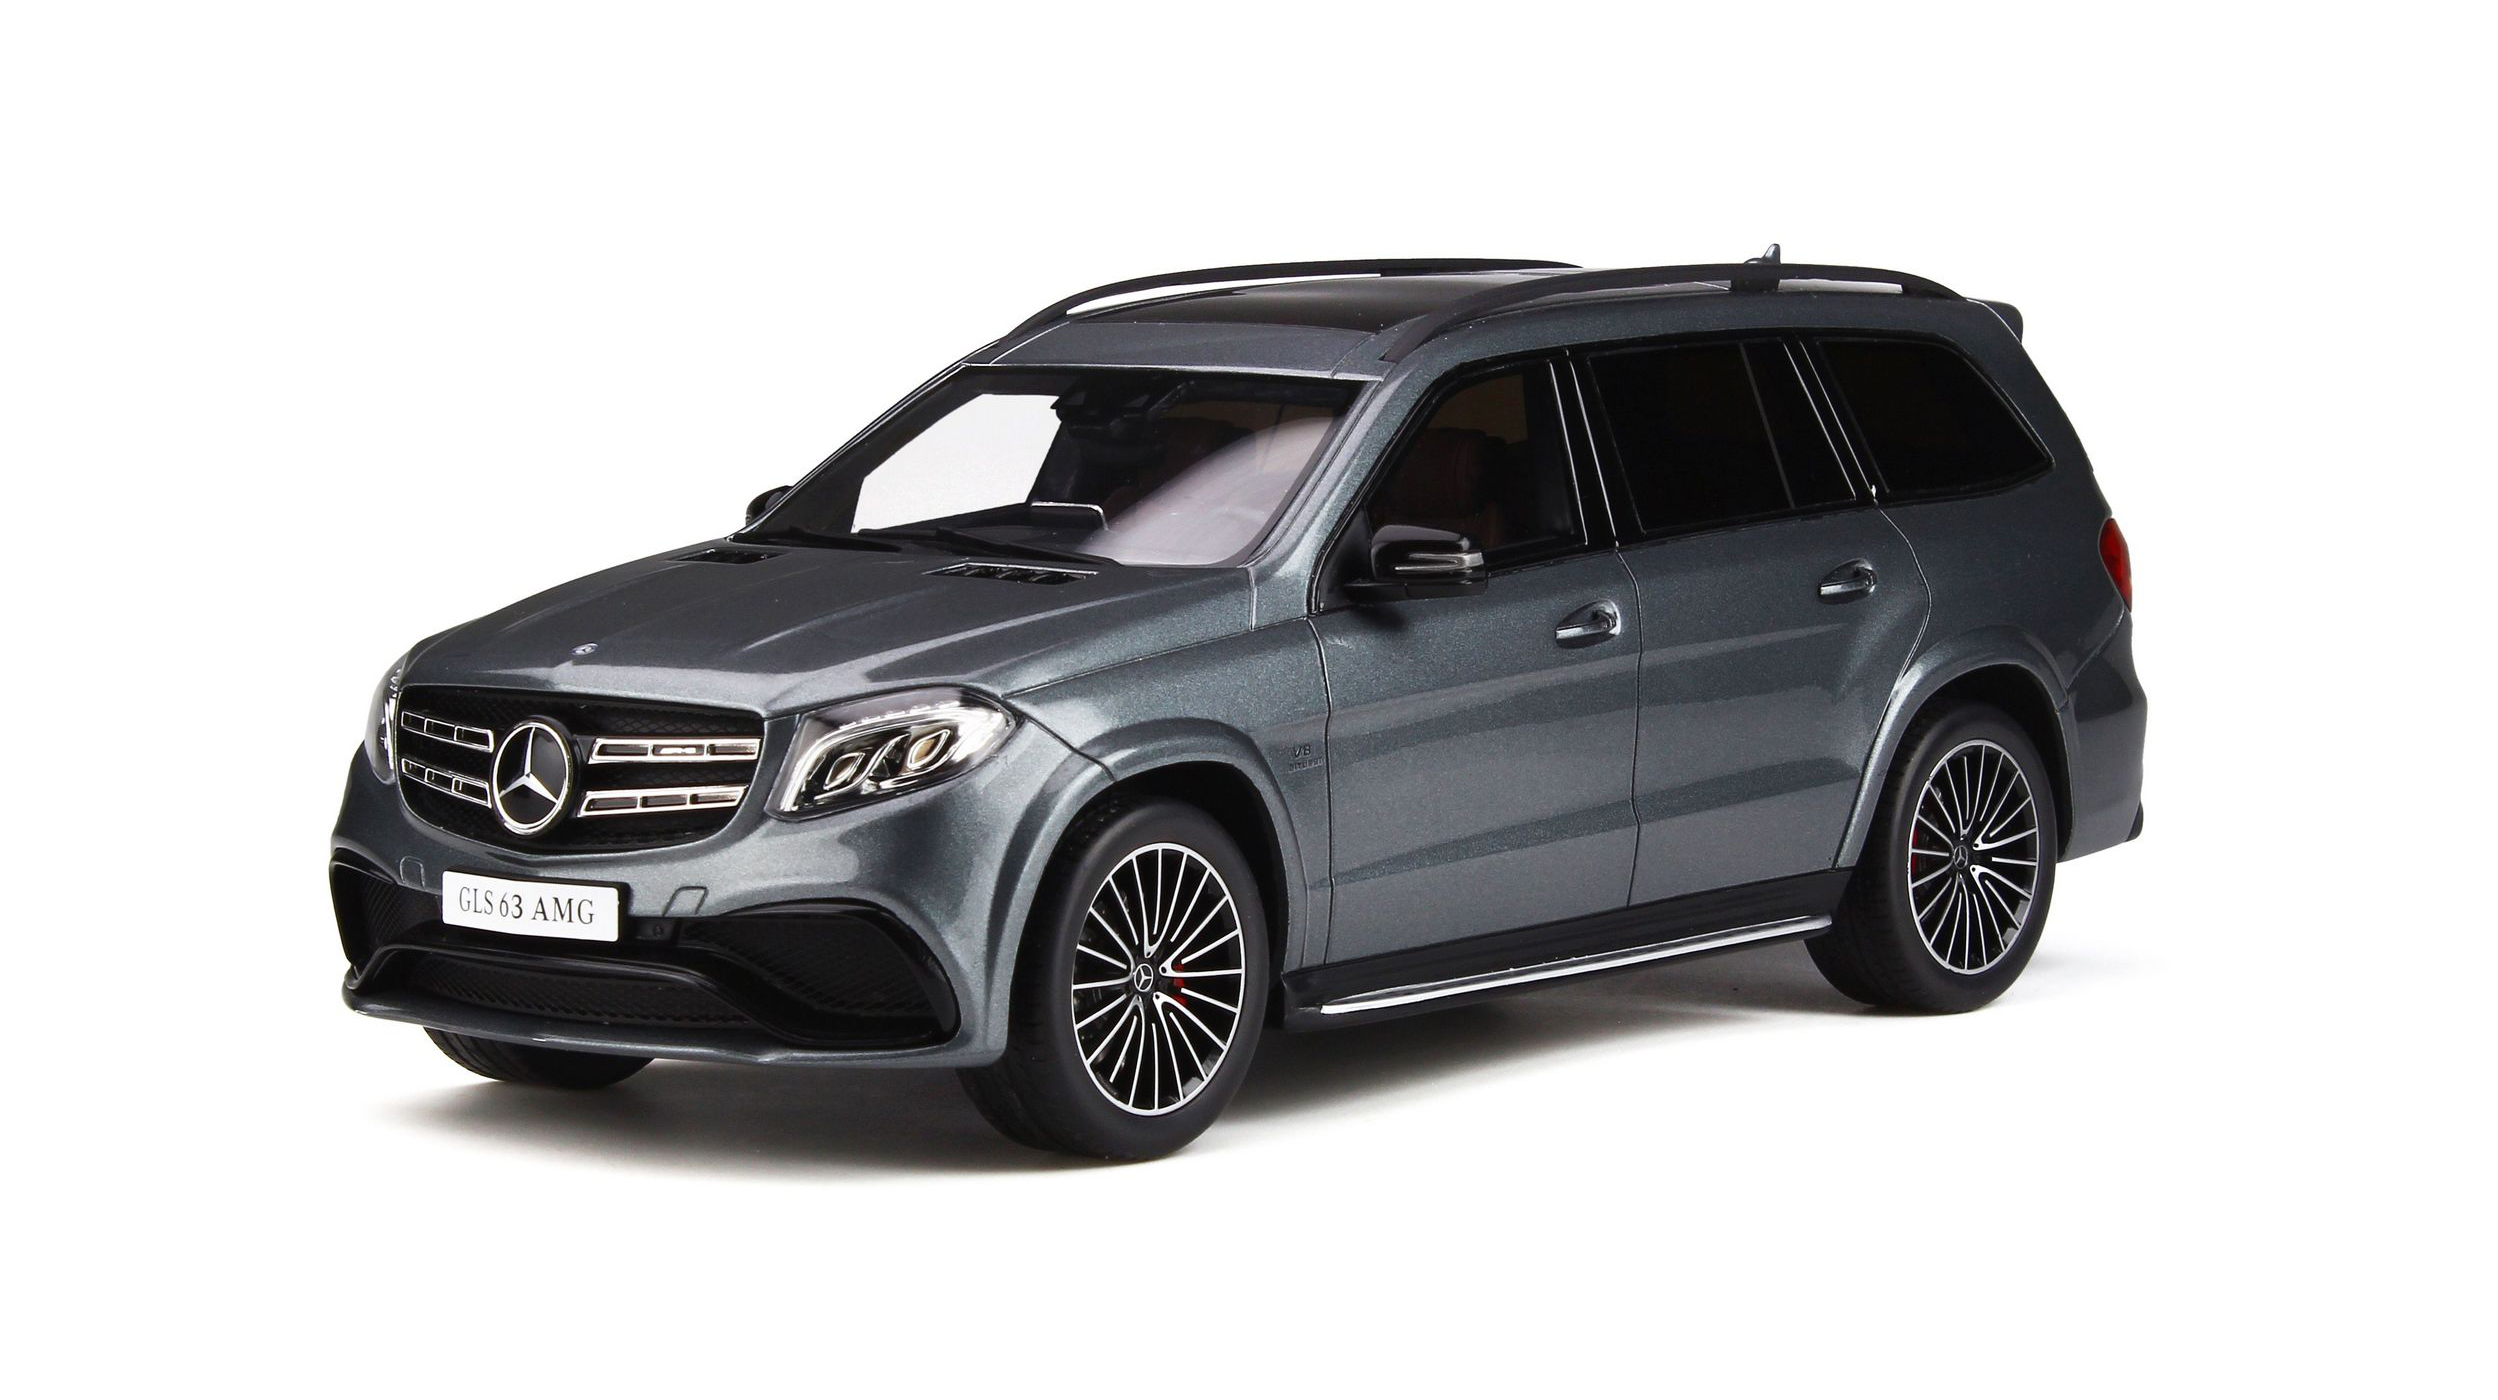 Mercedes Amg Gls 63 Selenite Gray Limited Edition To 500 Pieces Worldwide 1/18 Model Car By Gt Spirit